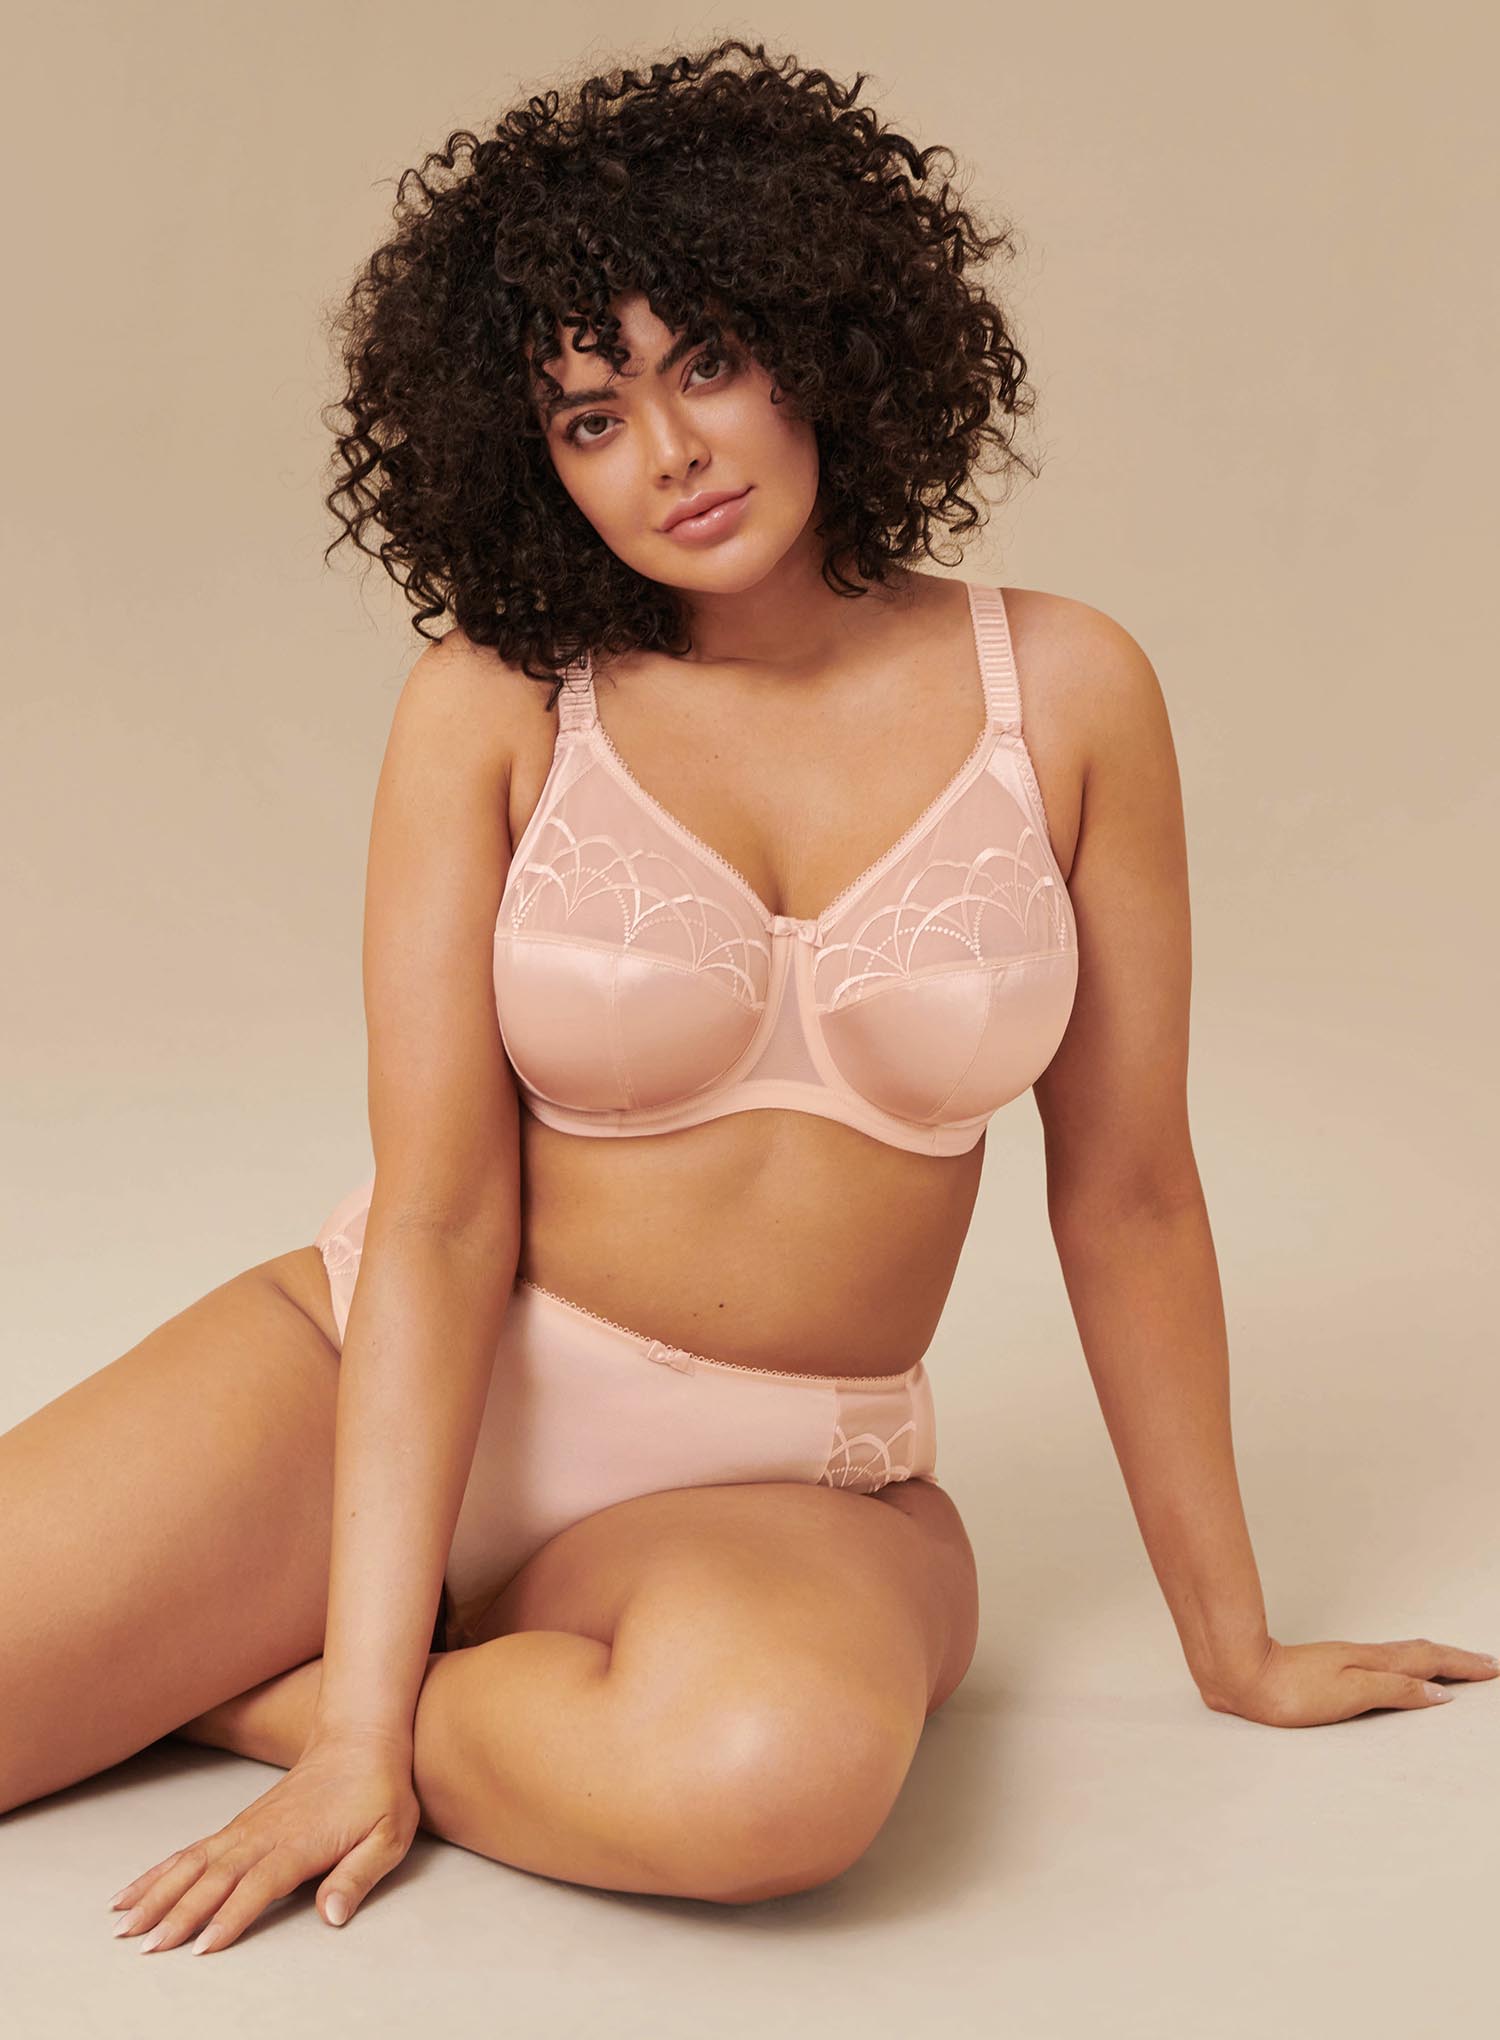 Embrace Your Body This Holiday Season with Plus Size Christmas Lingerie, by Innerwearaustralia